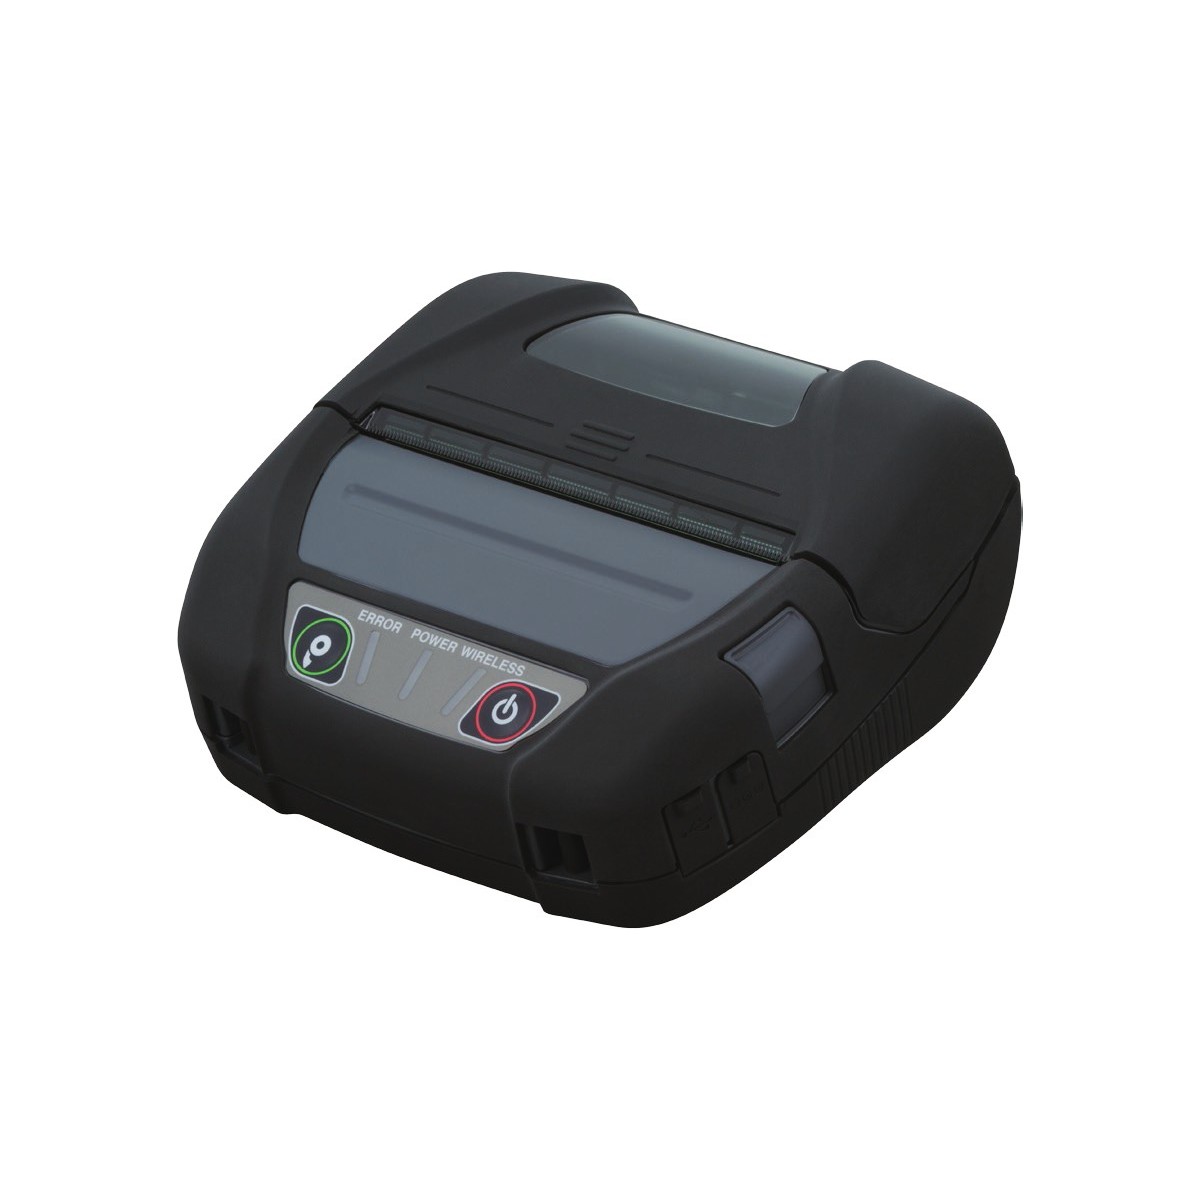 Seiko Instruments MP-A40 - Mobile printer - 105 mm-sec - 5.8 cm - 80 - 112 mm - 10.4 cm - Wired  Wireless